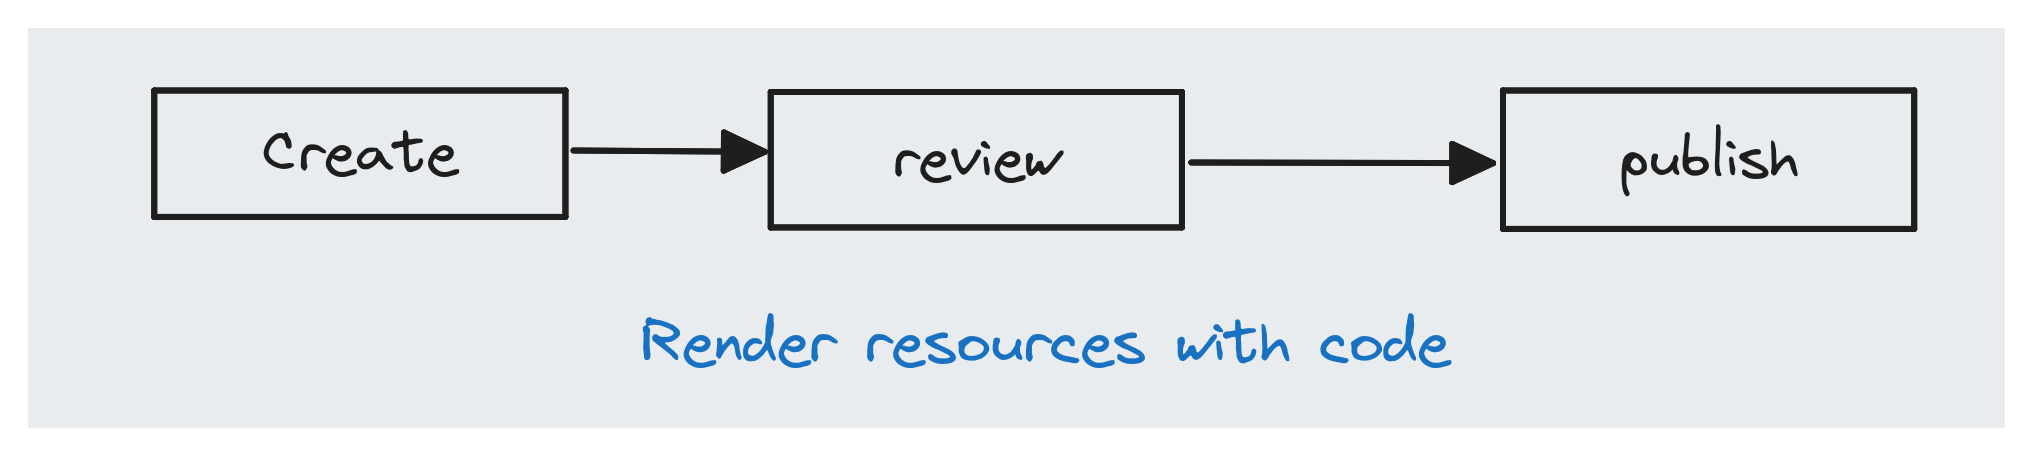 Review workflow